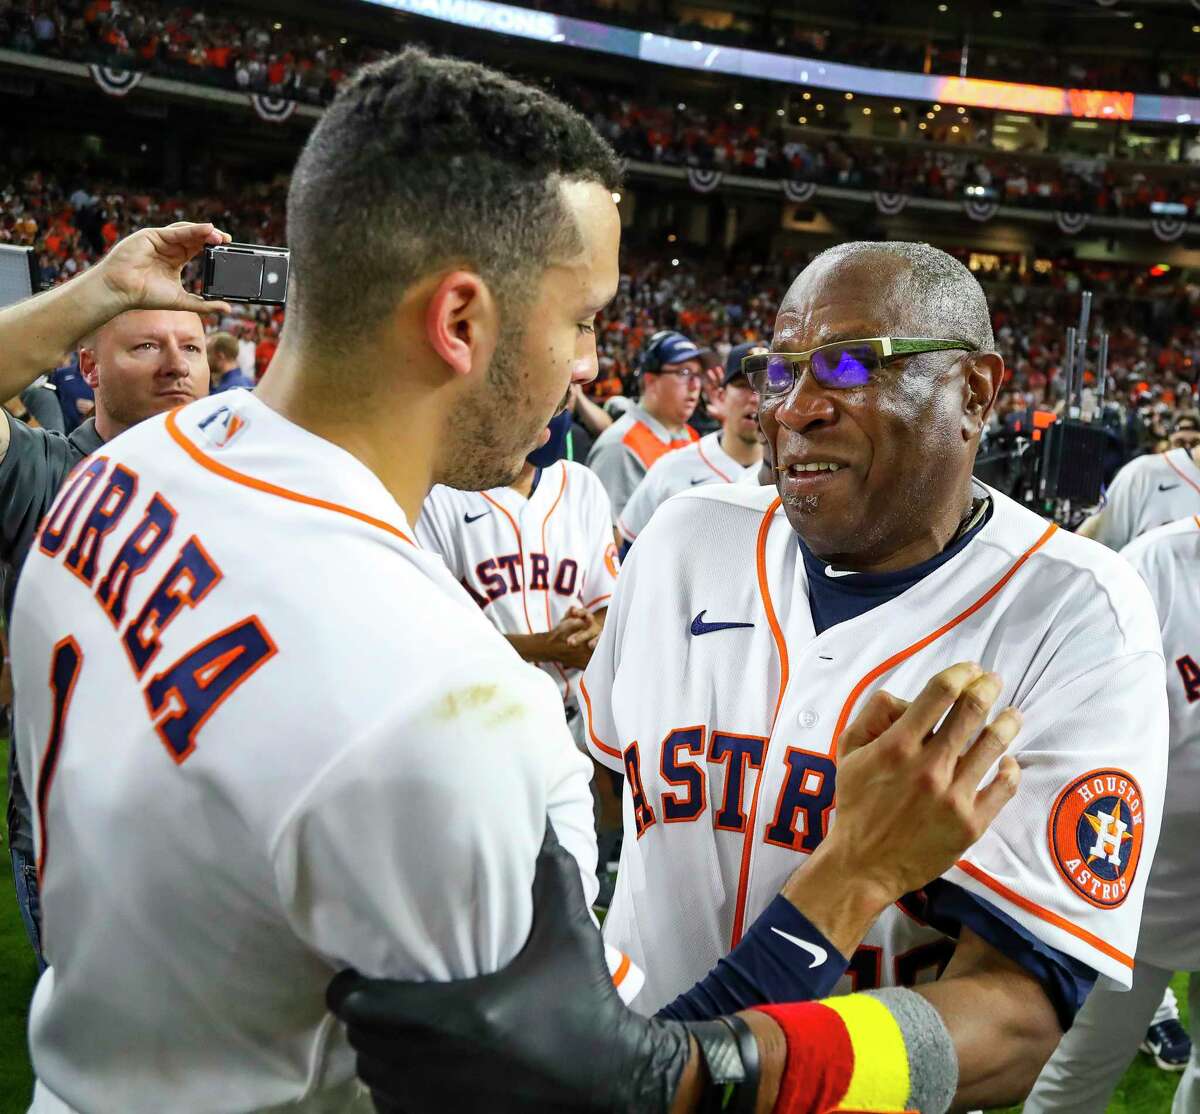 Carlos Correa and teammates will be out to give Dusty Baker his first World Series title as a manager.